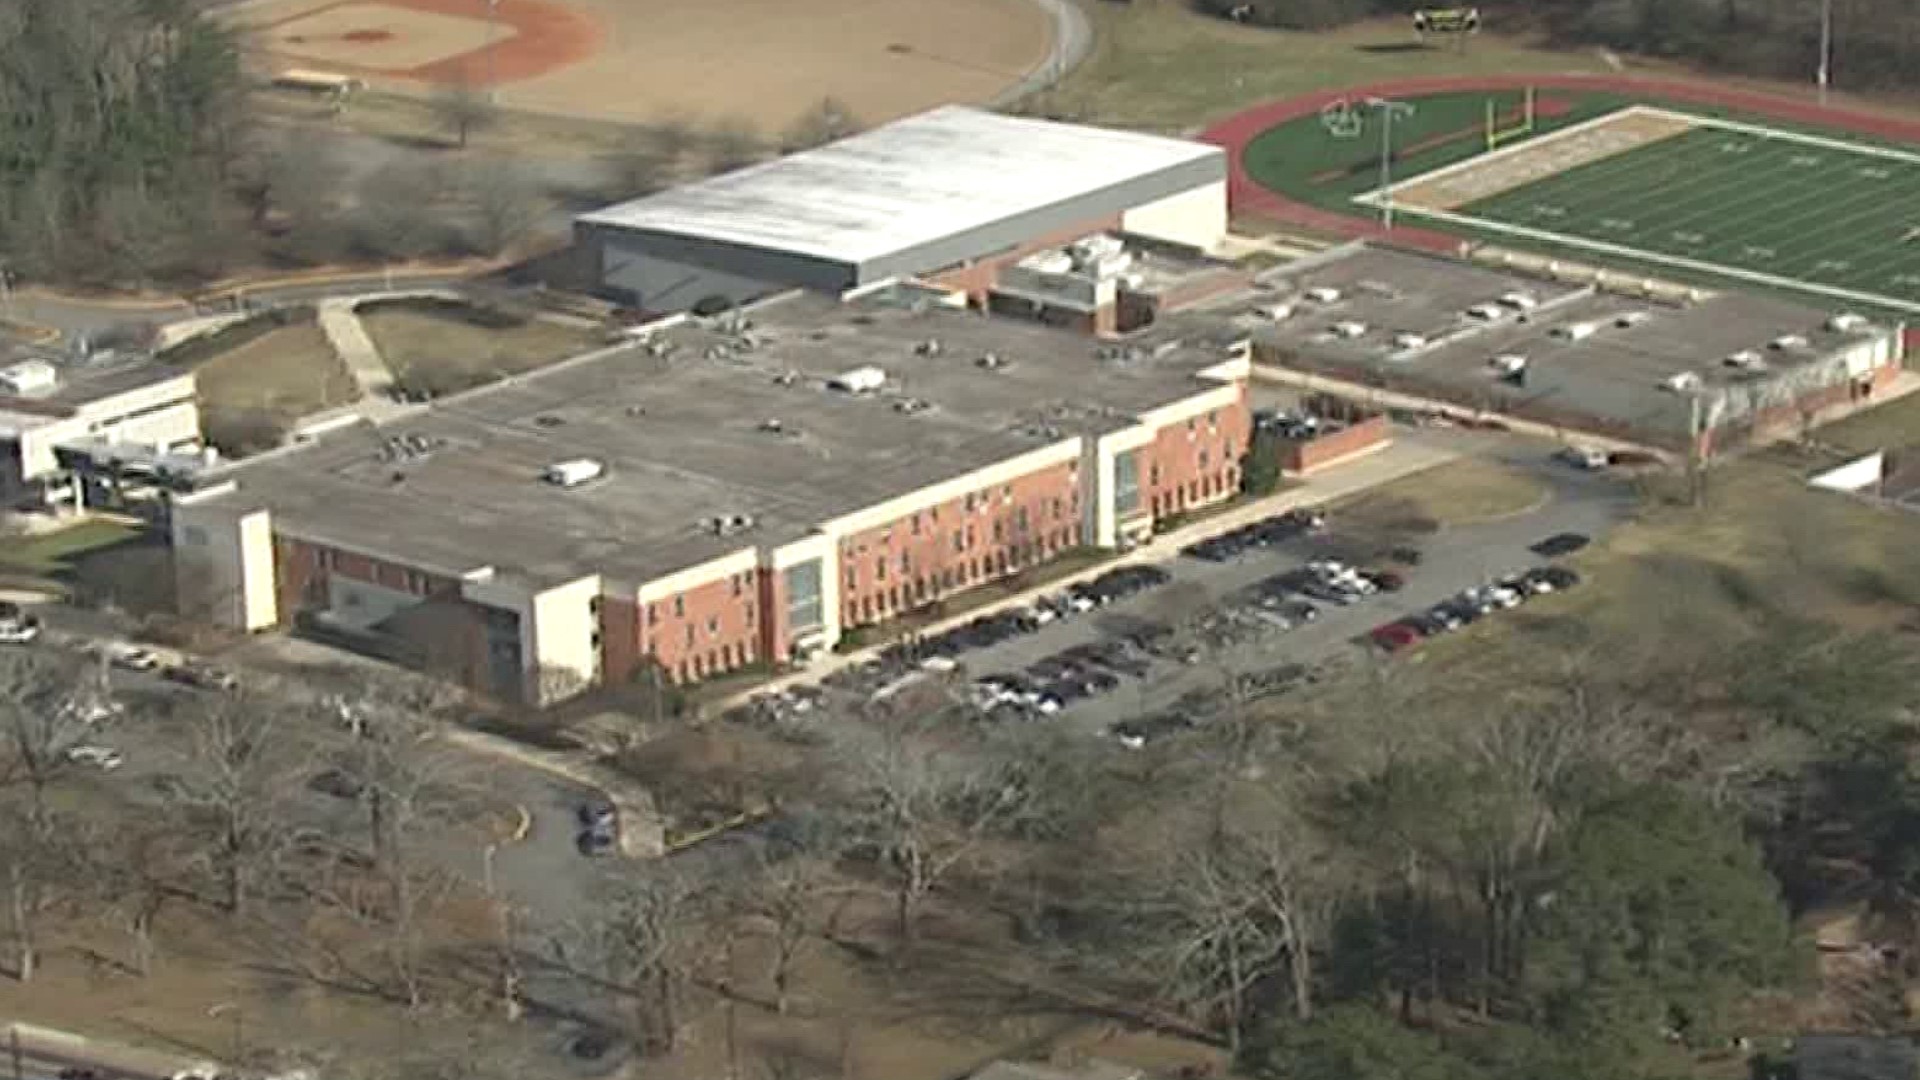 A small fire at Frederick Douglass High School in Atlanta forced an evacuation Thursday afternoon, a spokesperson with the Atlanta Fire Department said.